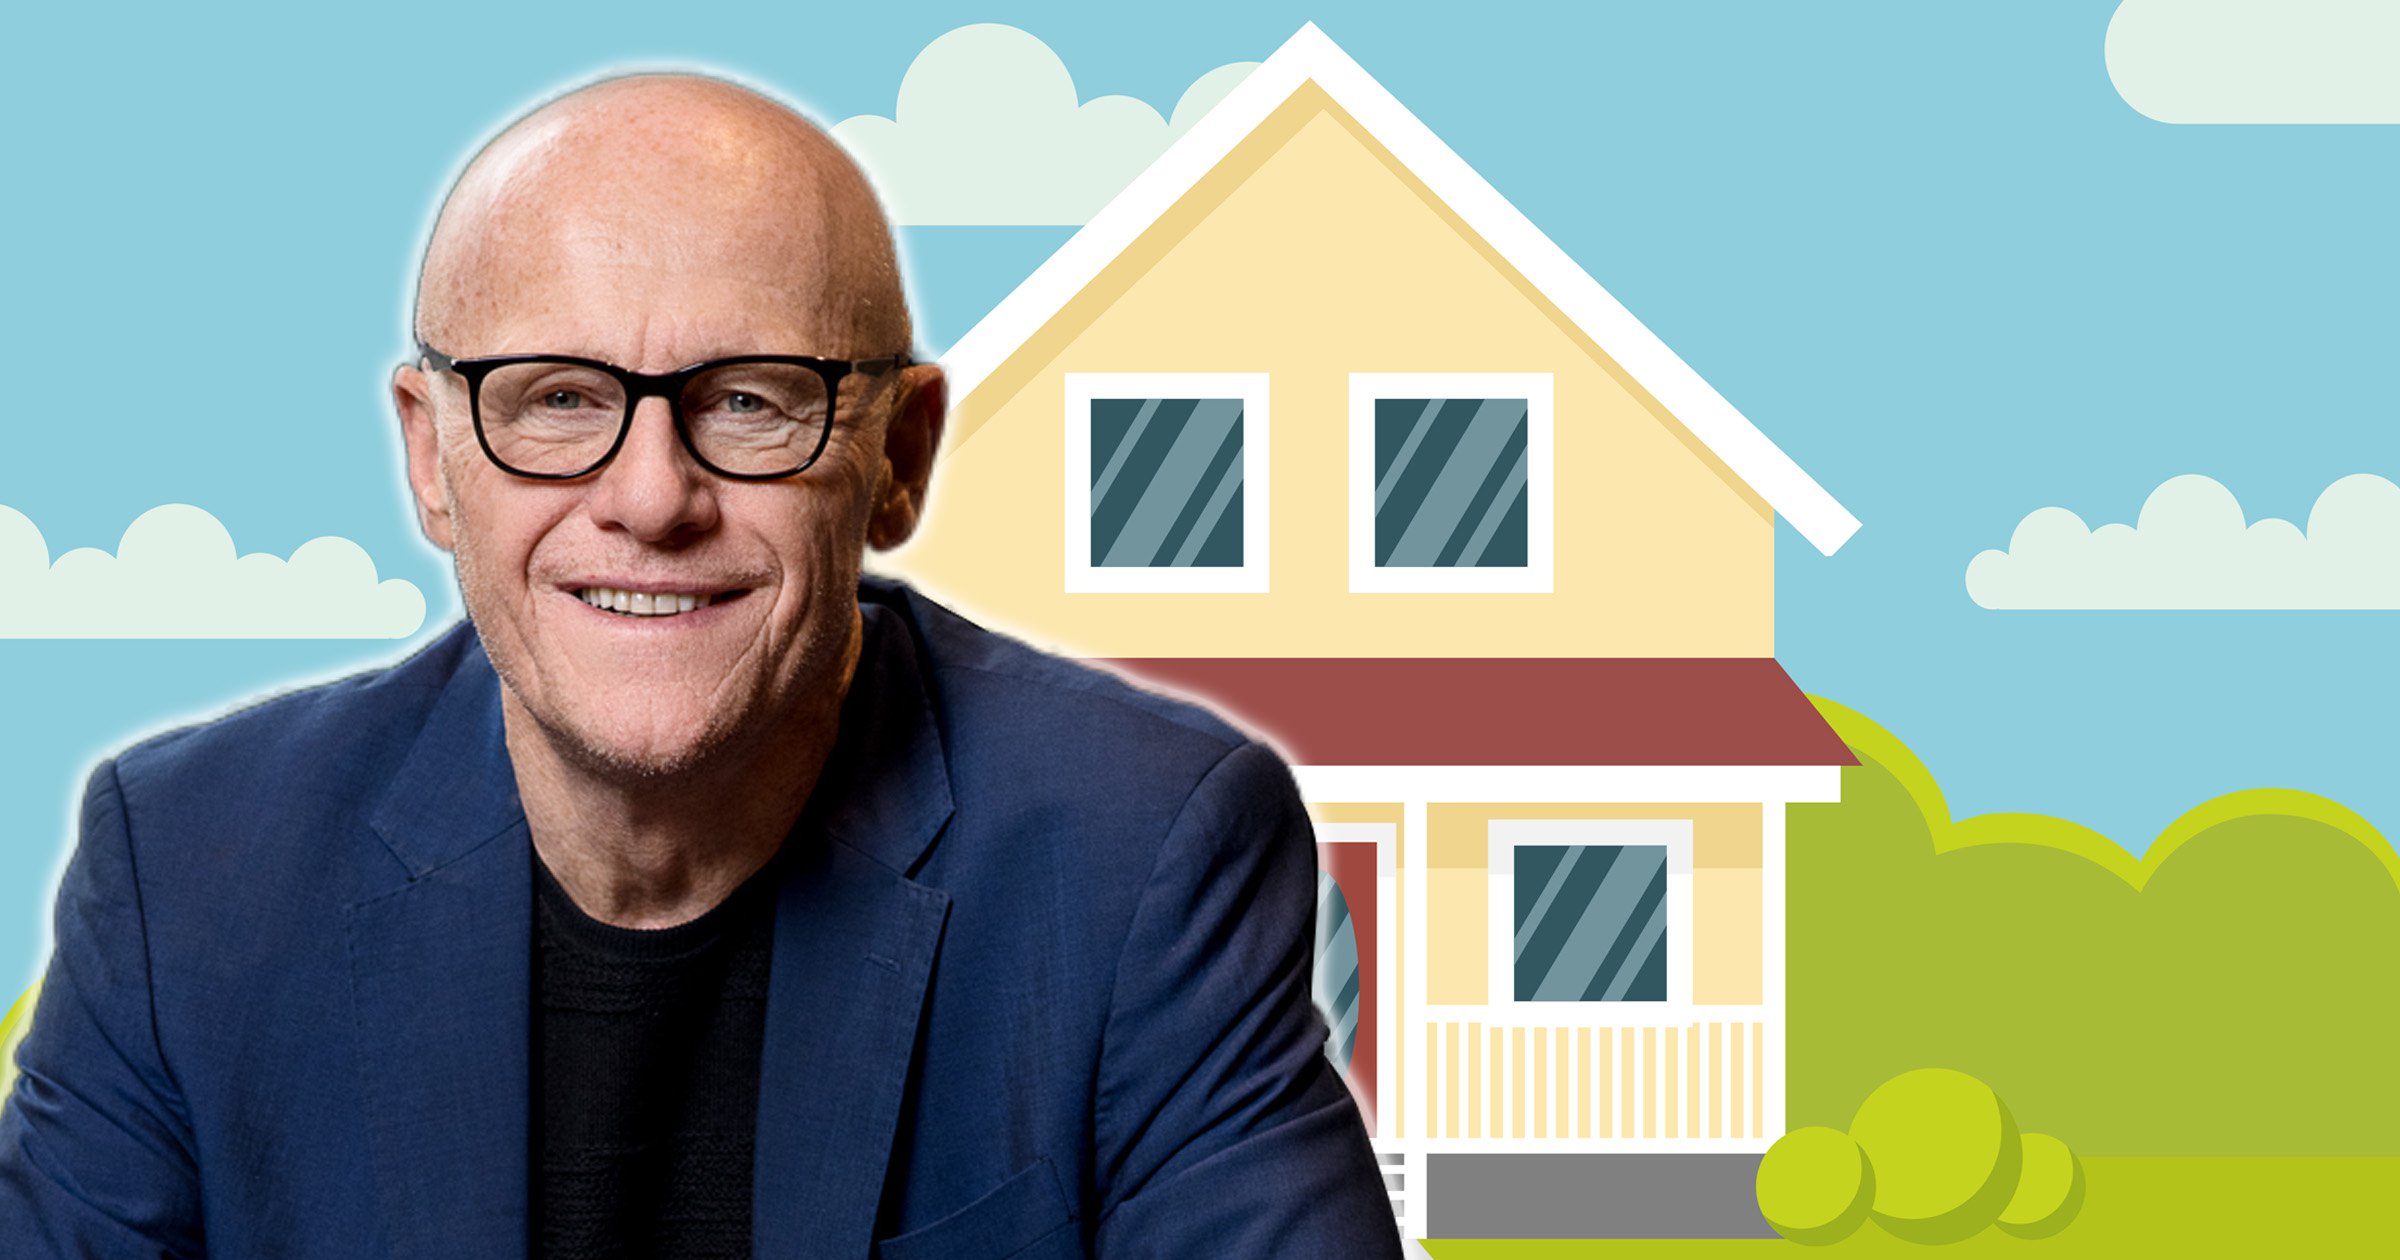 John Caudwell reveals buying his first home gave him the drive to build his business